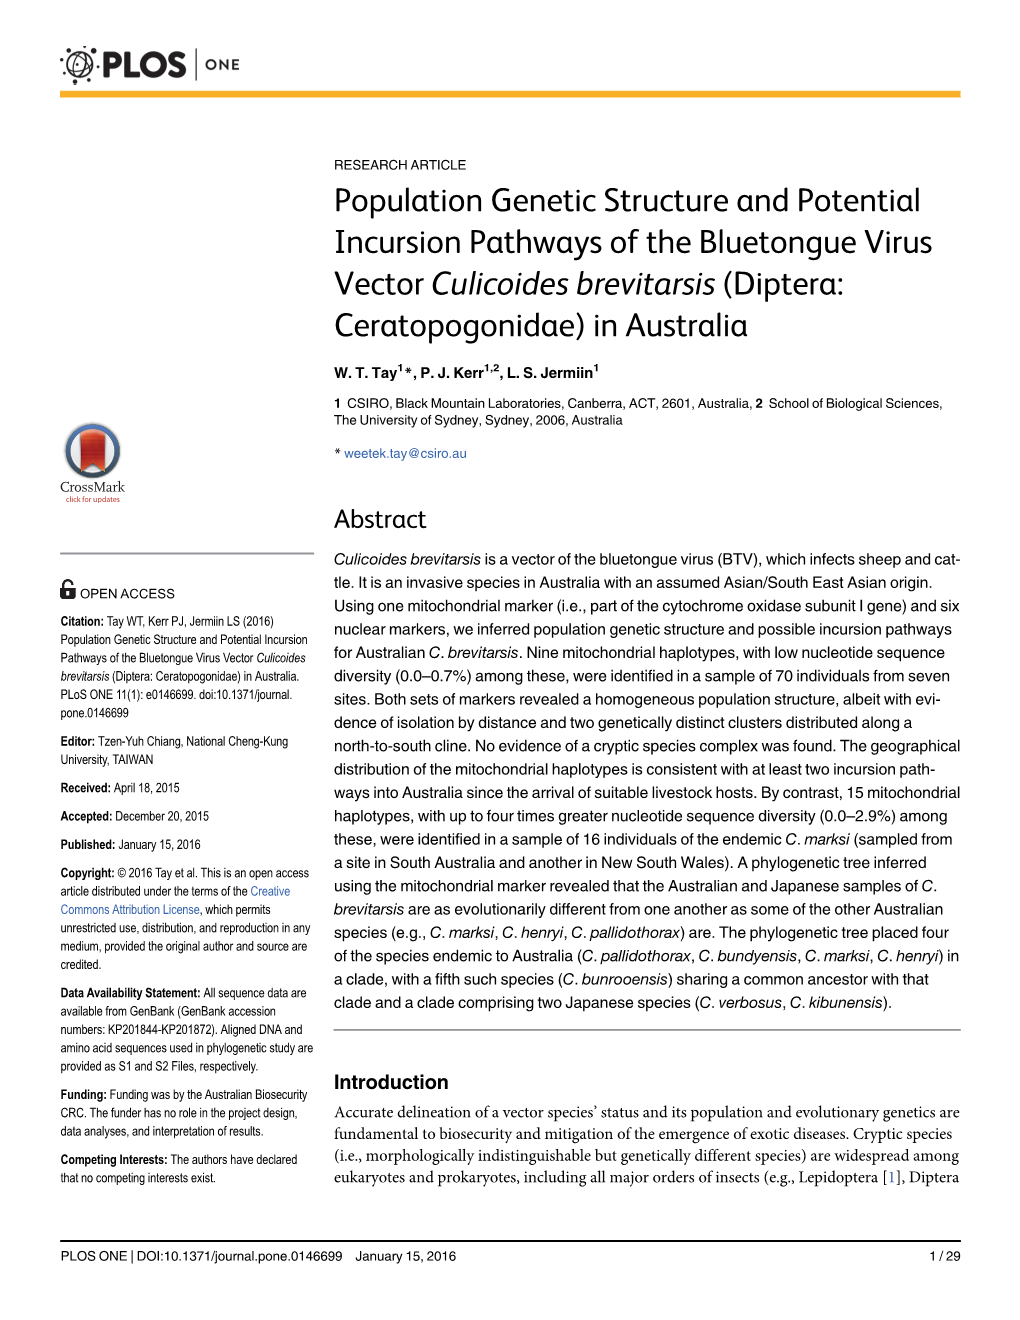 Population Genetic Structure and Potential Incursion Pathways of the Bluetongue Virus Vector Culicoides Brevitarsis (Diptera: Ceratopogonidae) in Australia